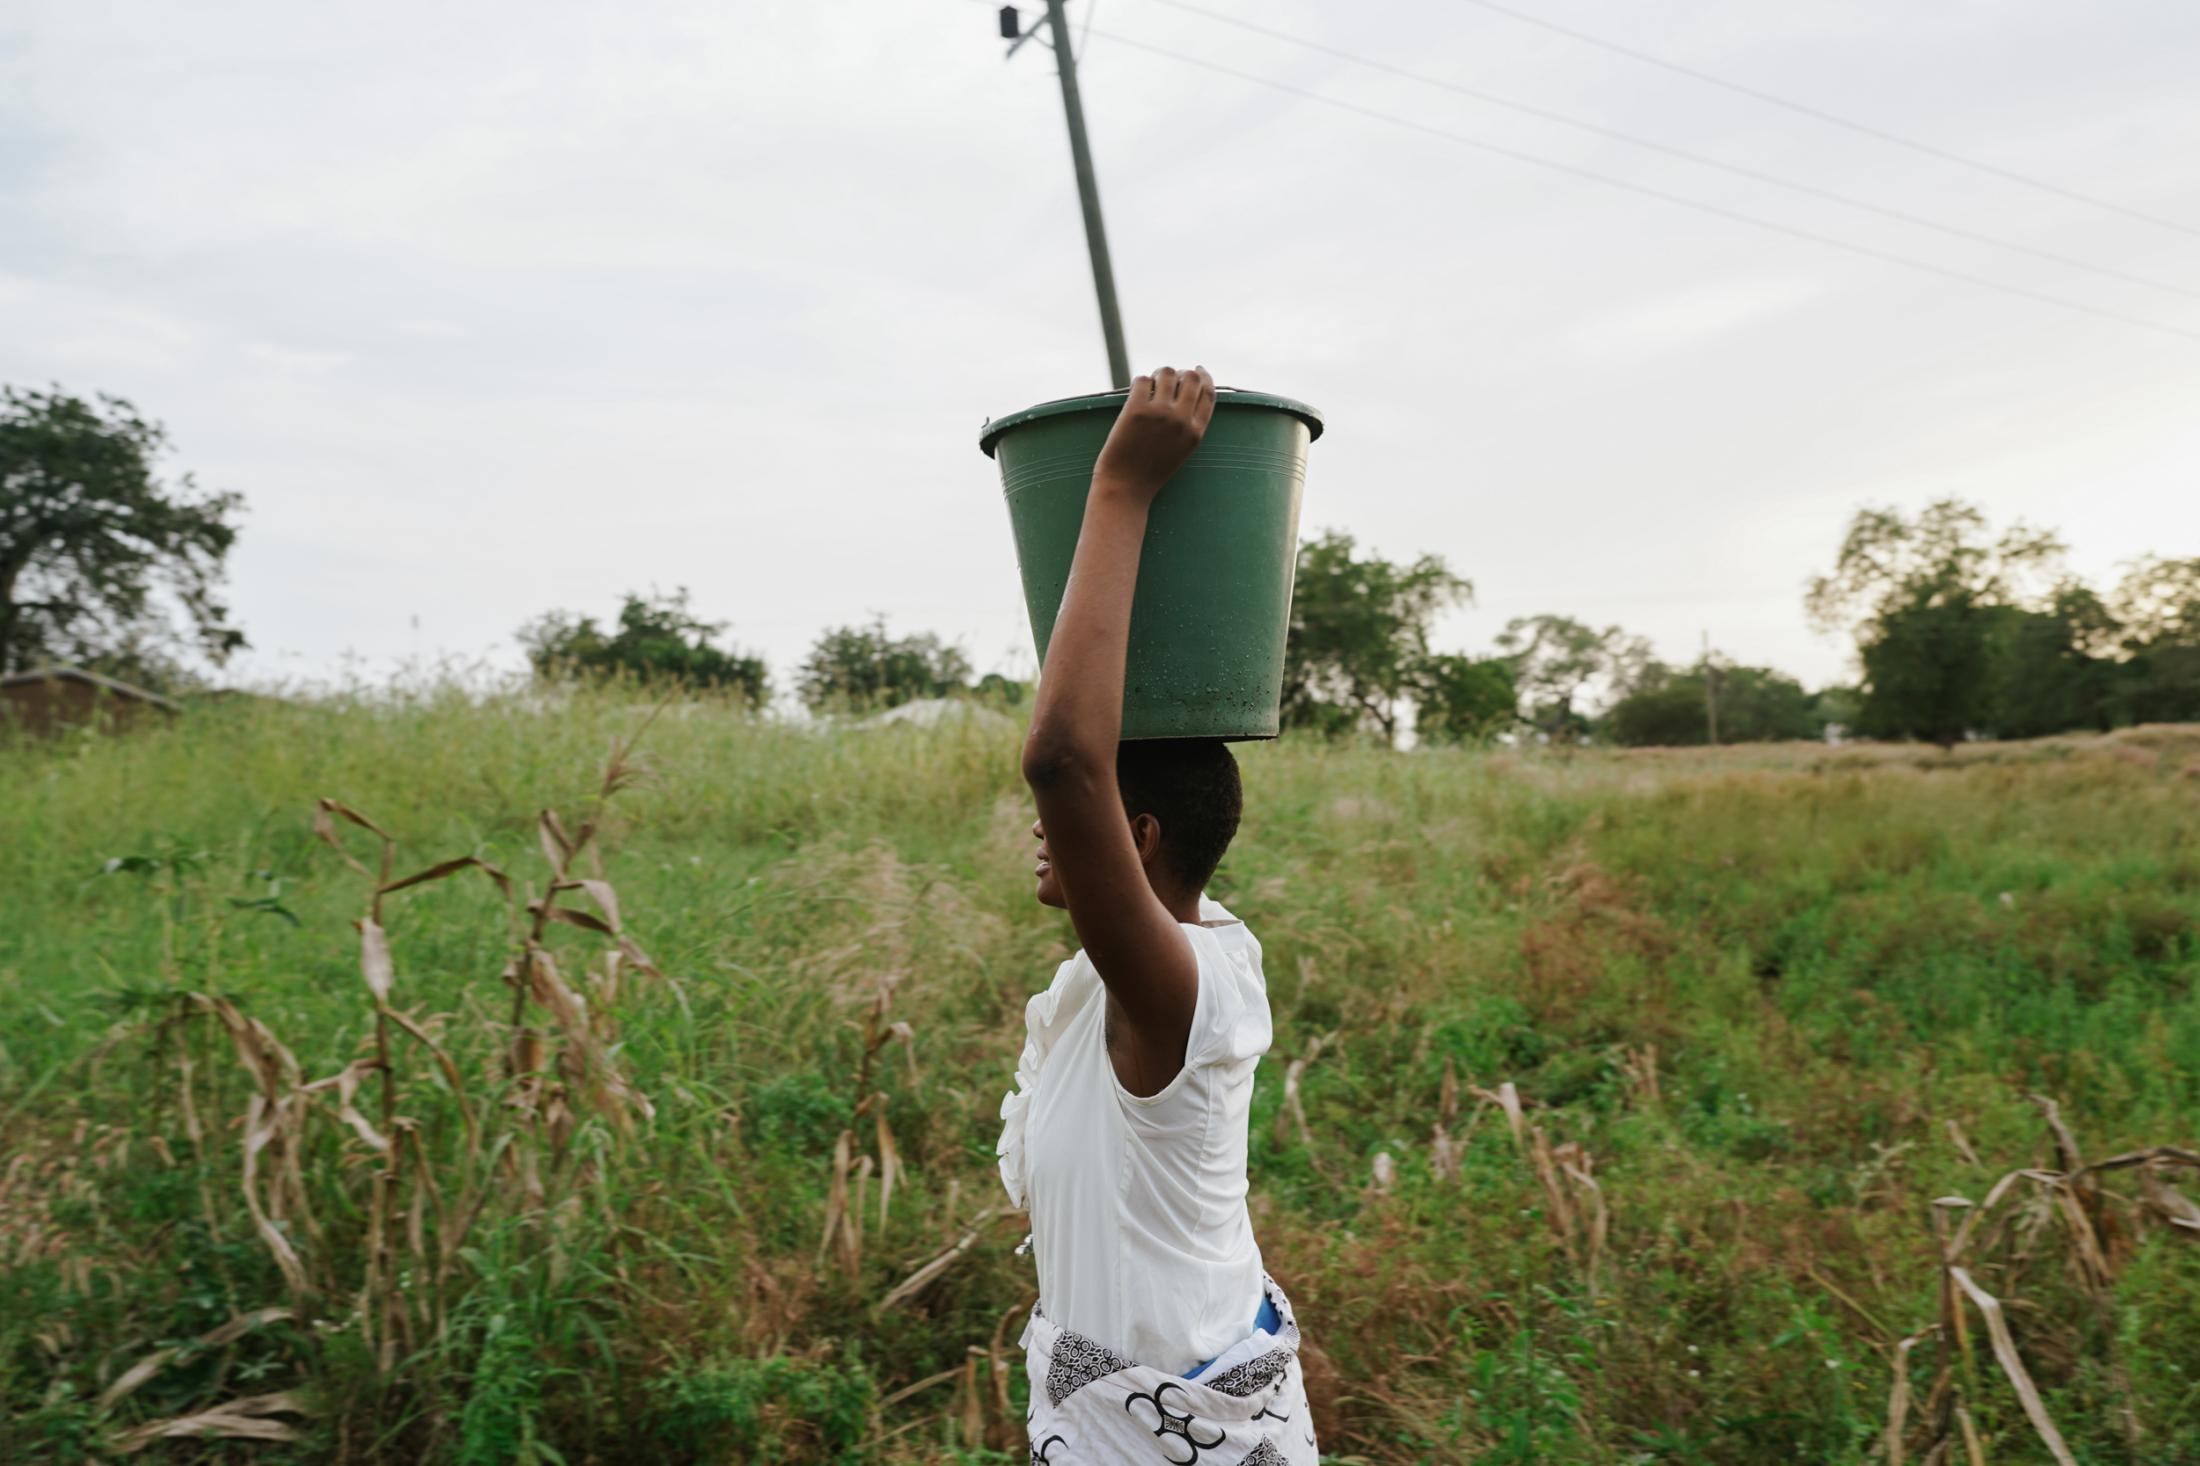 Francisca Akanko (14), student of Azenab Girls Primary School, fetches water as one of her after school chores. Wiaga, Upper East Region of Ghana, October 27, 2021